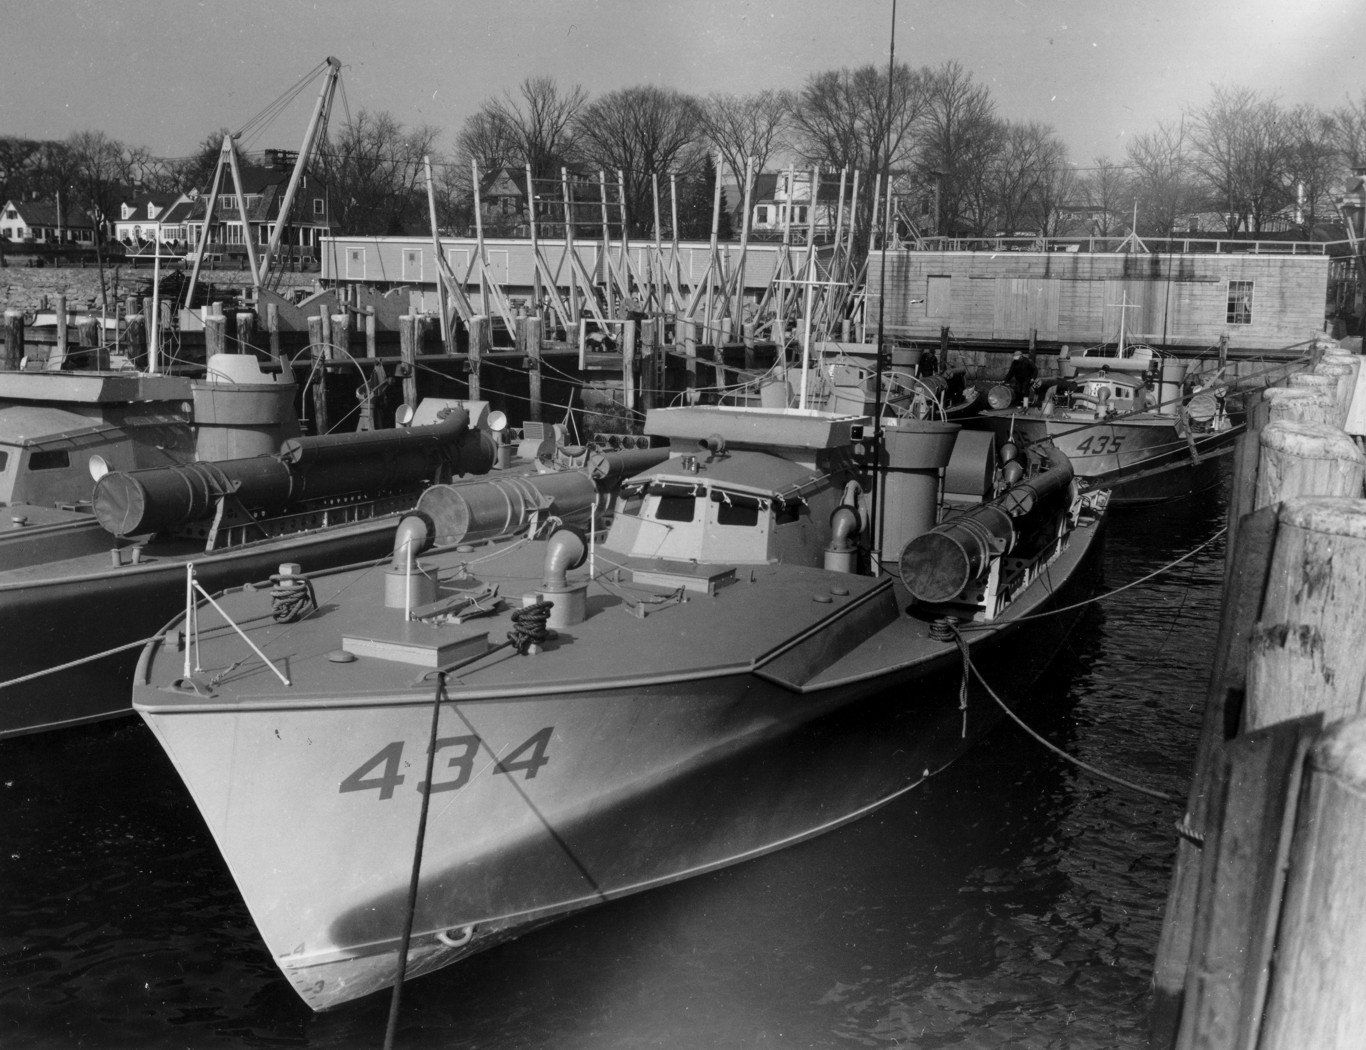 PT-434, an American built British Vosper design 70-foot motor torpedo boat shortly after completion at the Herreshoff Manufacturing Company in Bristol, Rhode Island, United States, Mar 1944.